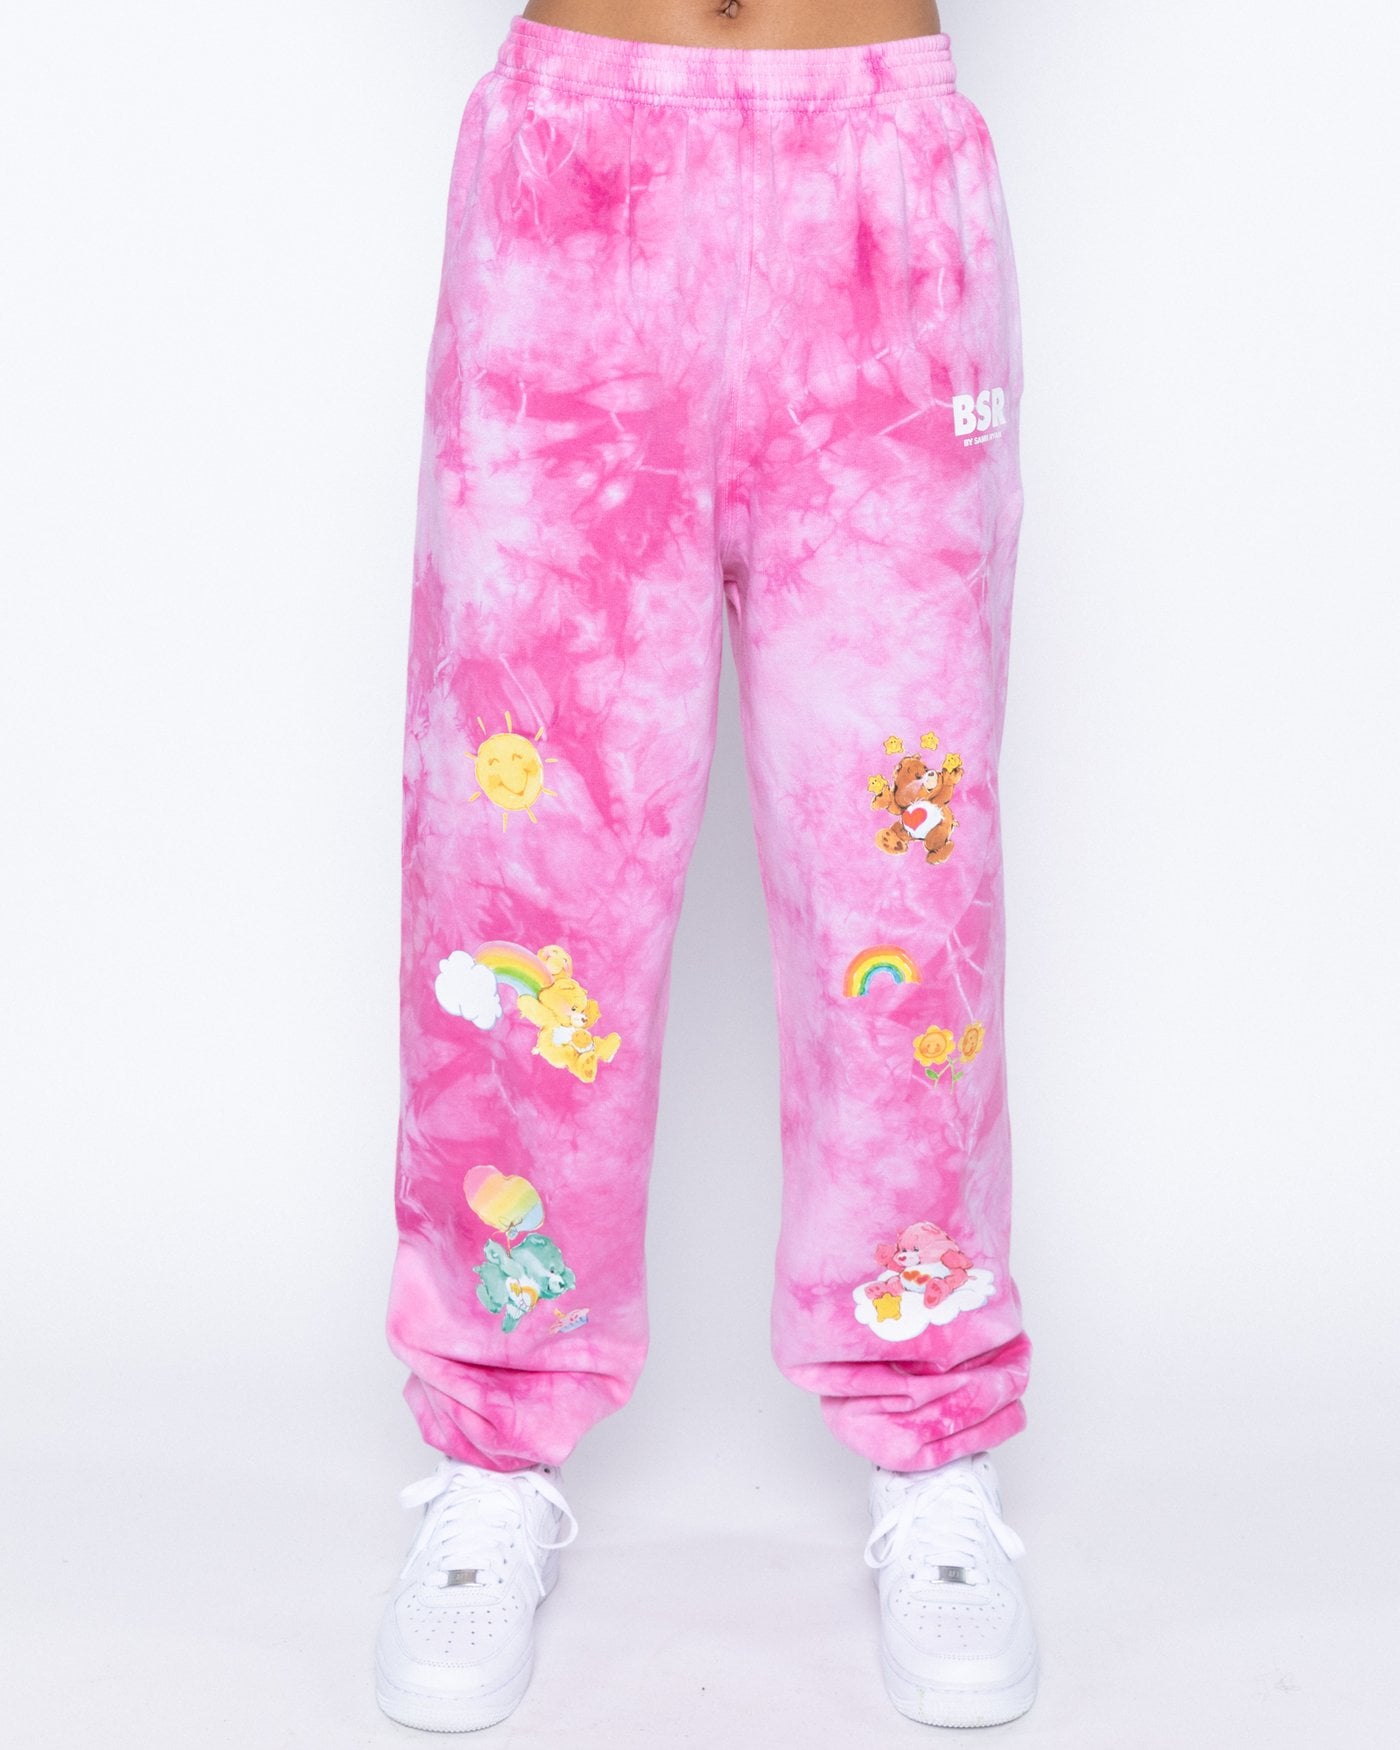 By Samii Ryan Happy Thoughts Pink Tie-Dye Sweatpants, That's My Best Friend:  Saweetie's Pink Tie-Dye Sweatsuit Can Be Yours For $154